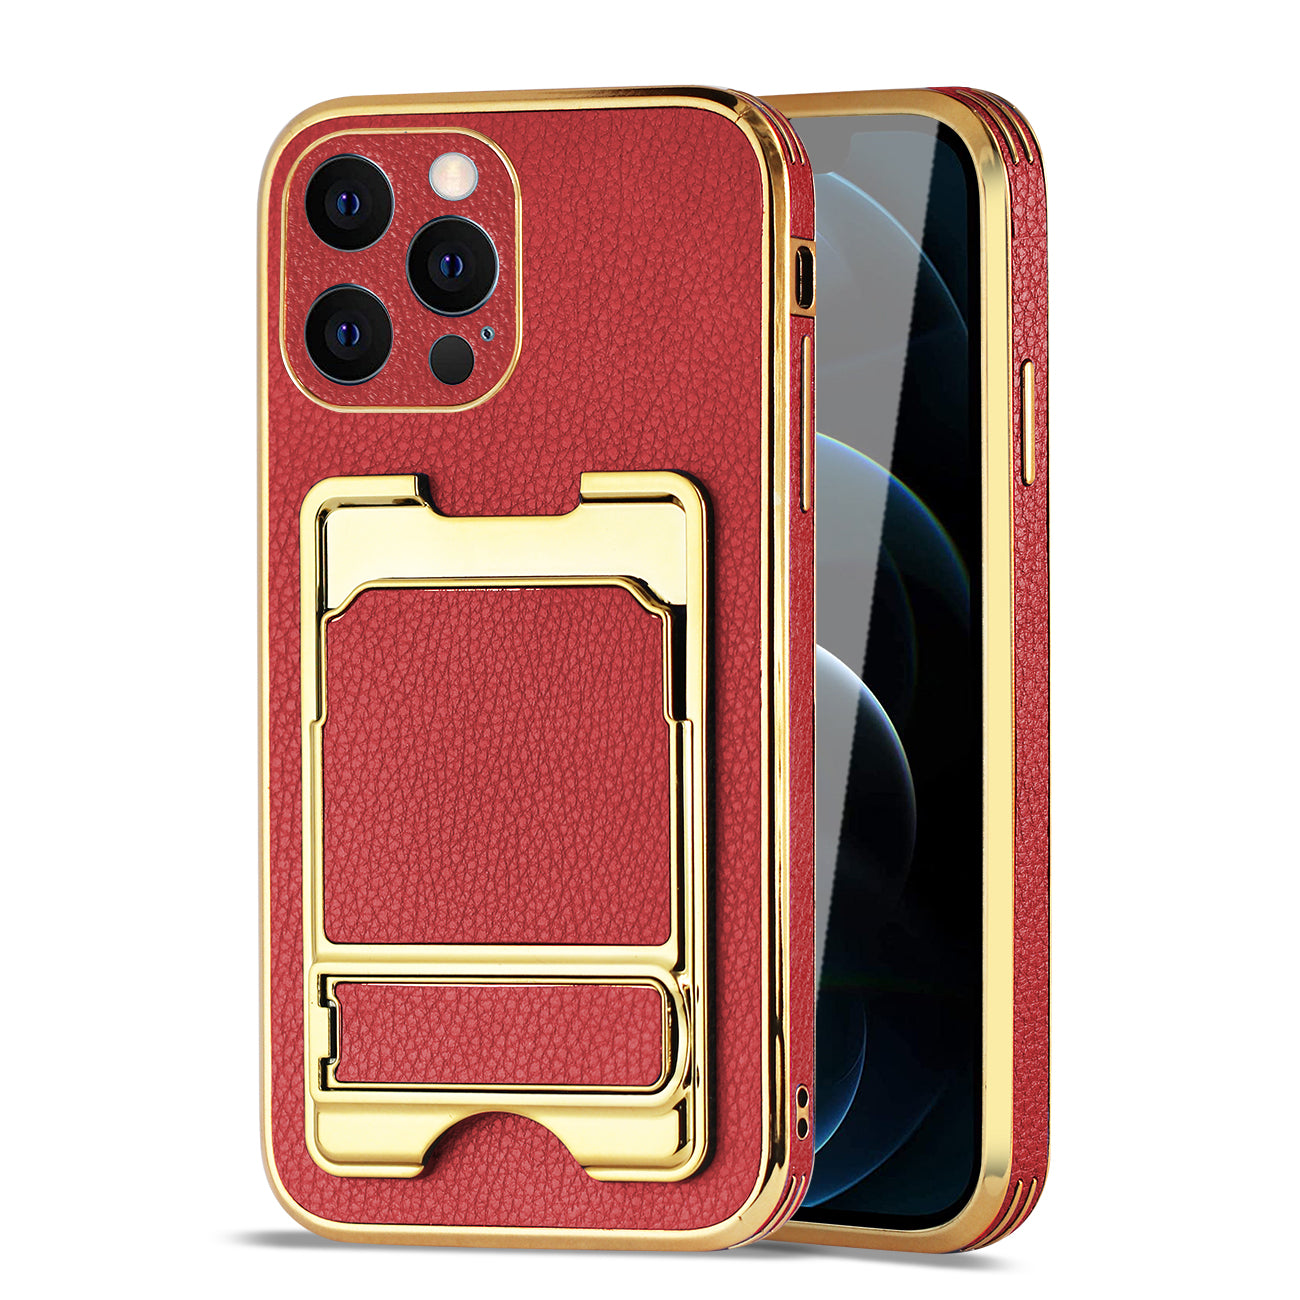 IPHONE 12 Max Leather Case with Card Holder In Red